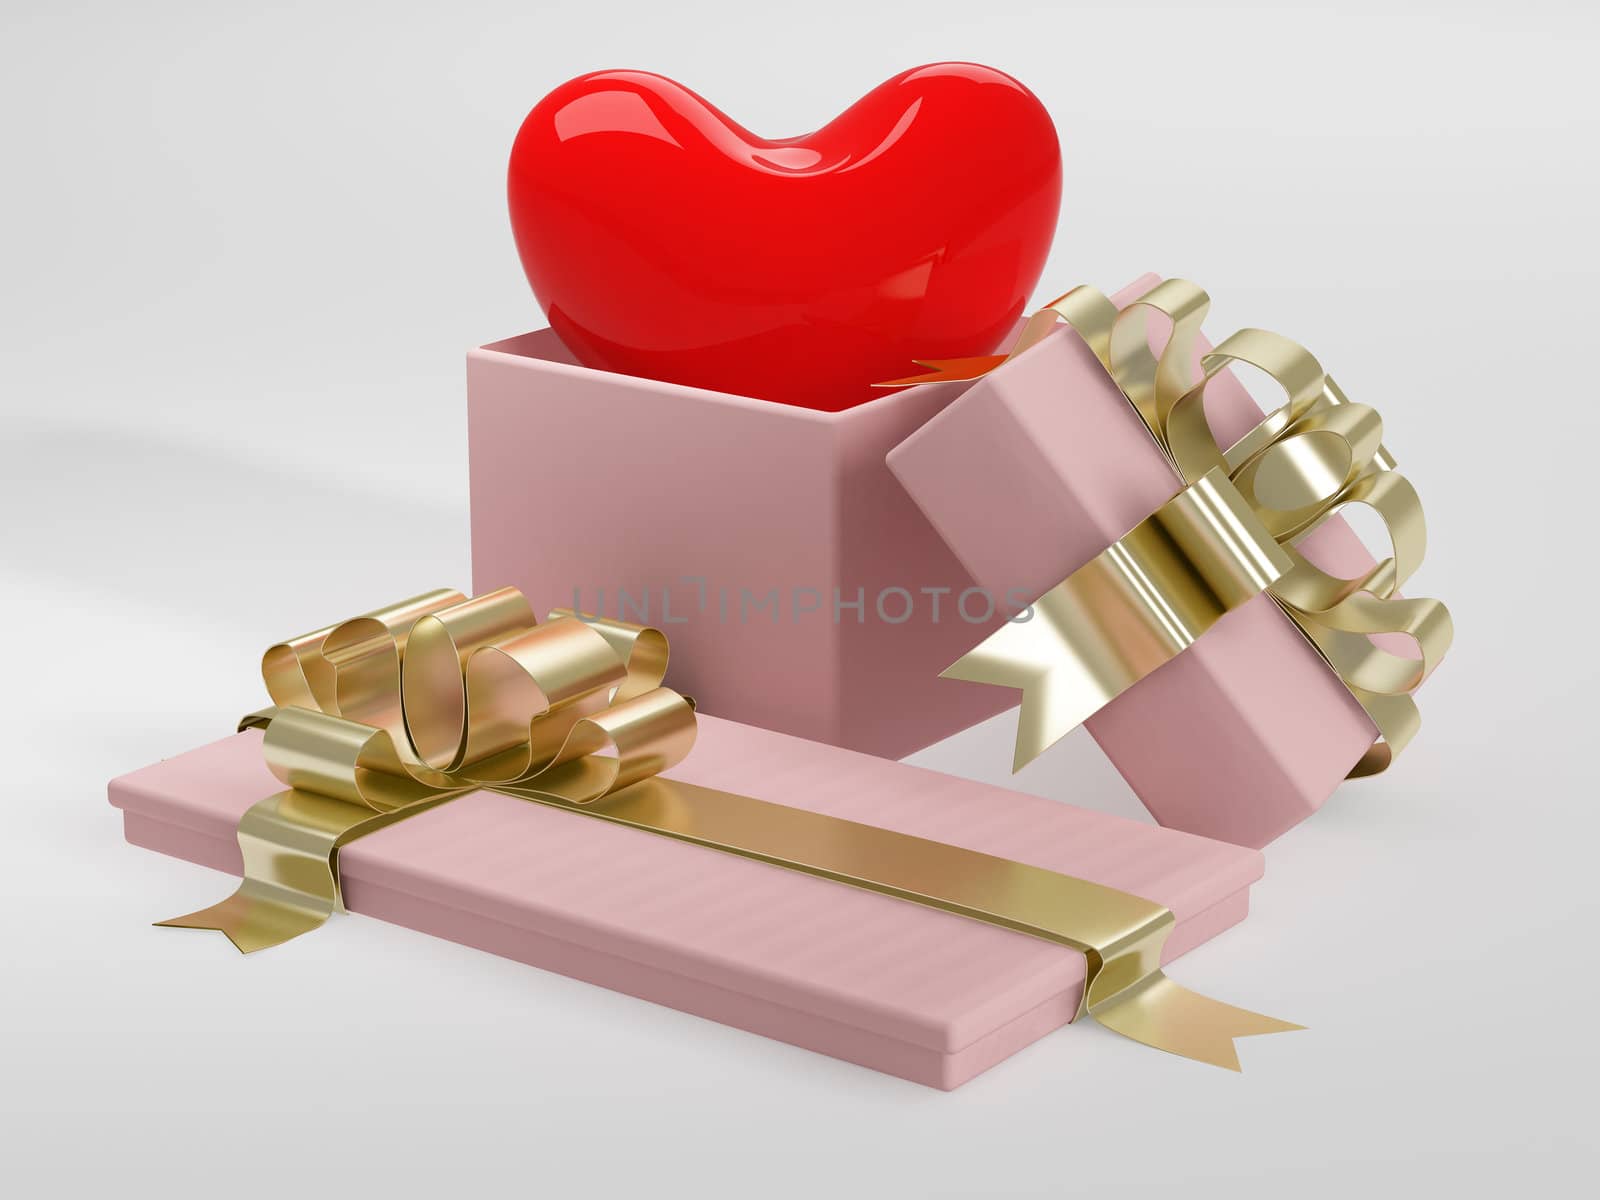 Heart in gift packing. 3D image.